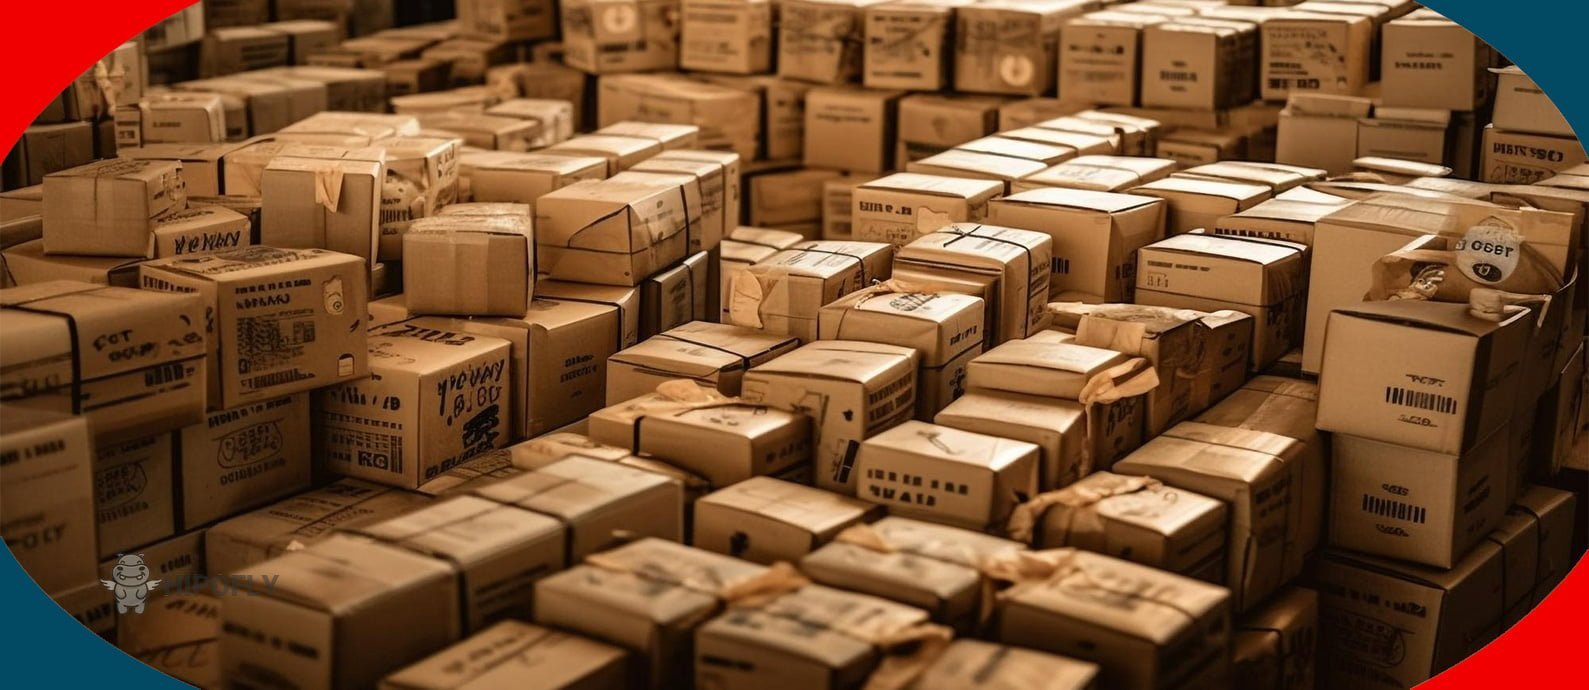 Strategic Advantages of Warehousing in China